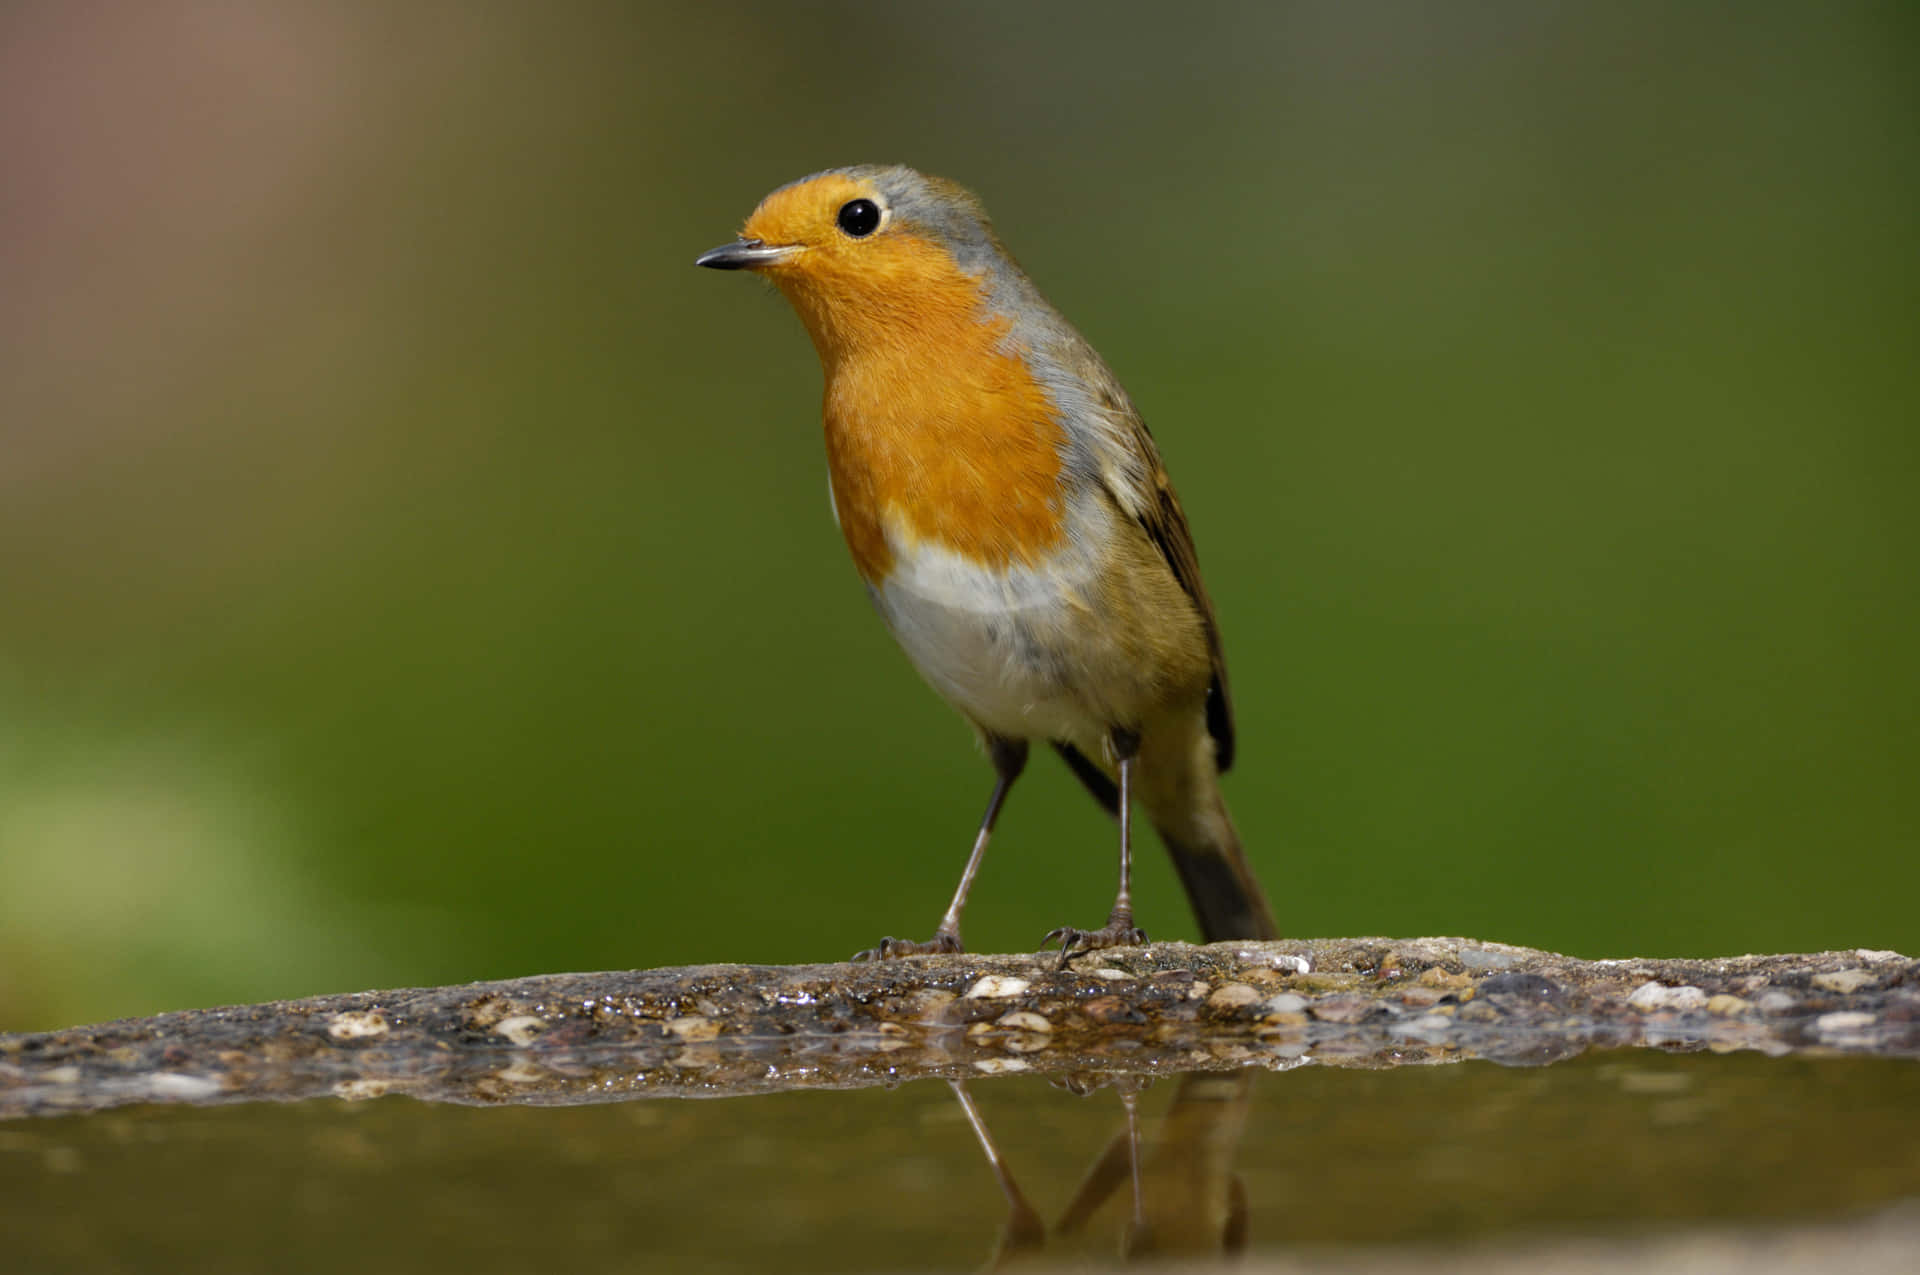 The vibrant colors of nature displayed in a tiny Robin